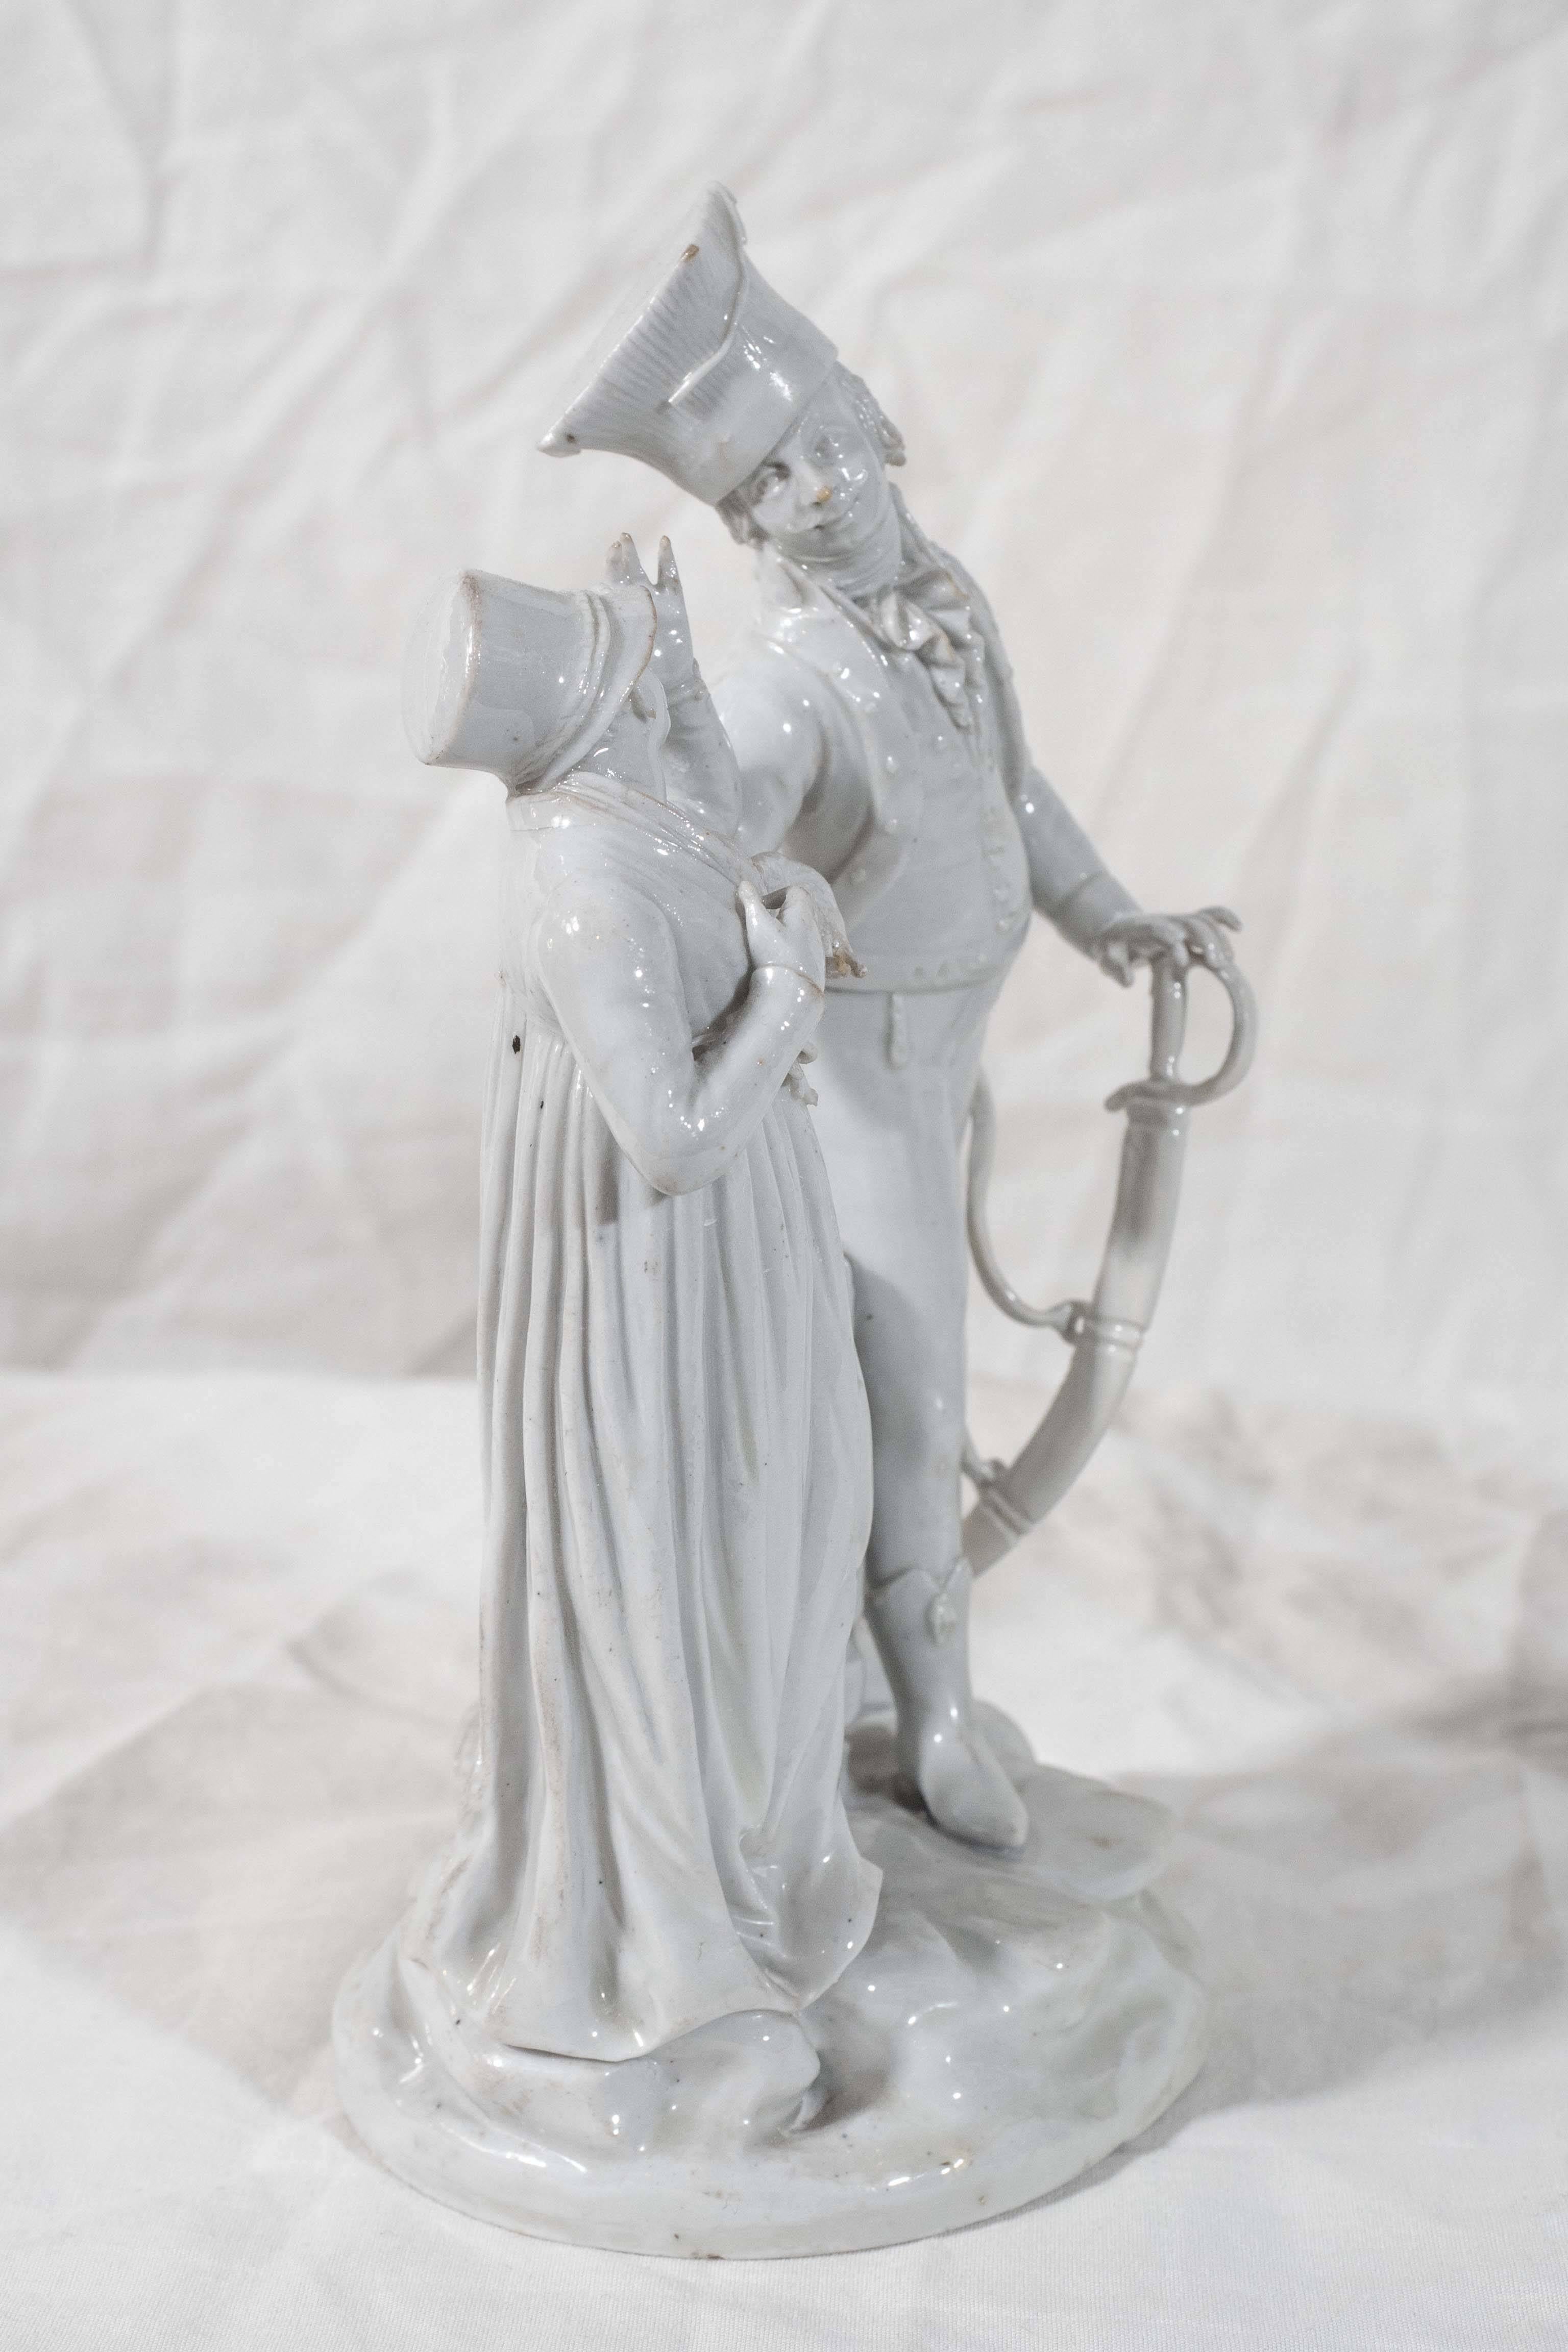 Glazed Pair Antique Italian Porcelain Figures Early 19th Century Made by Le Nove For Sale